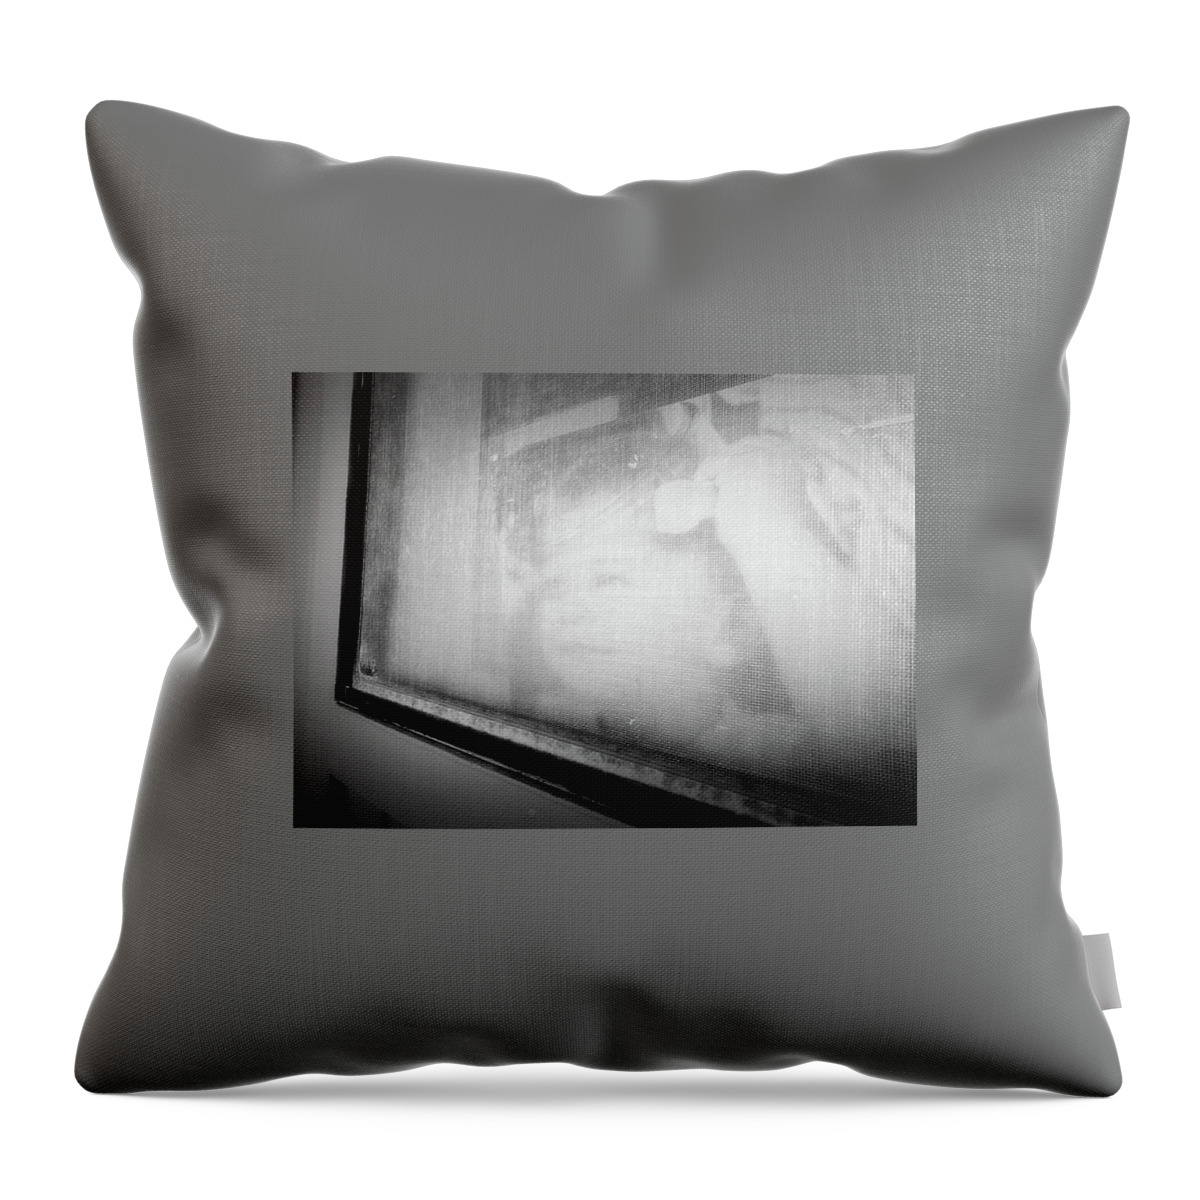 Unusual Portrait Throw Pillow featuring the photograph Looking by John Parulis